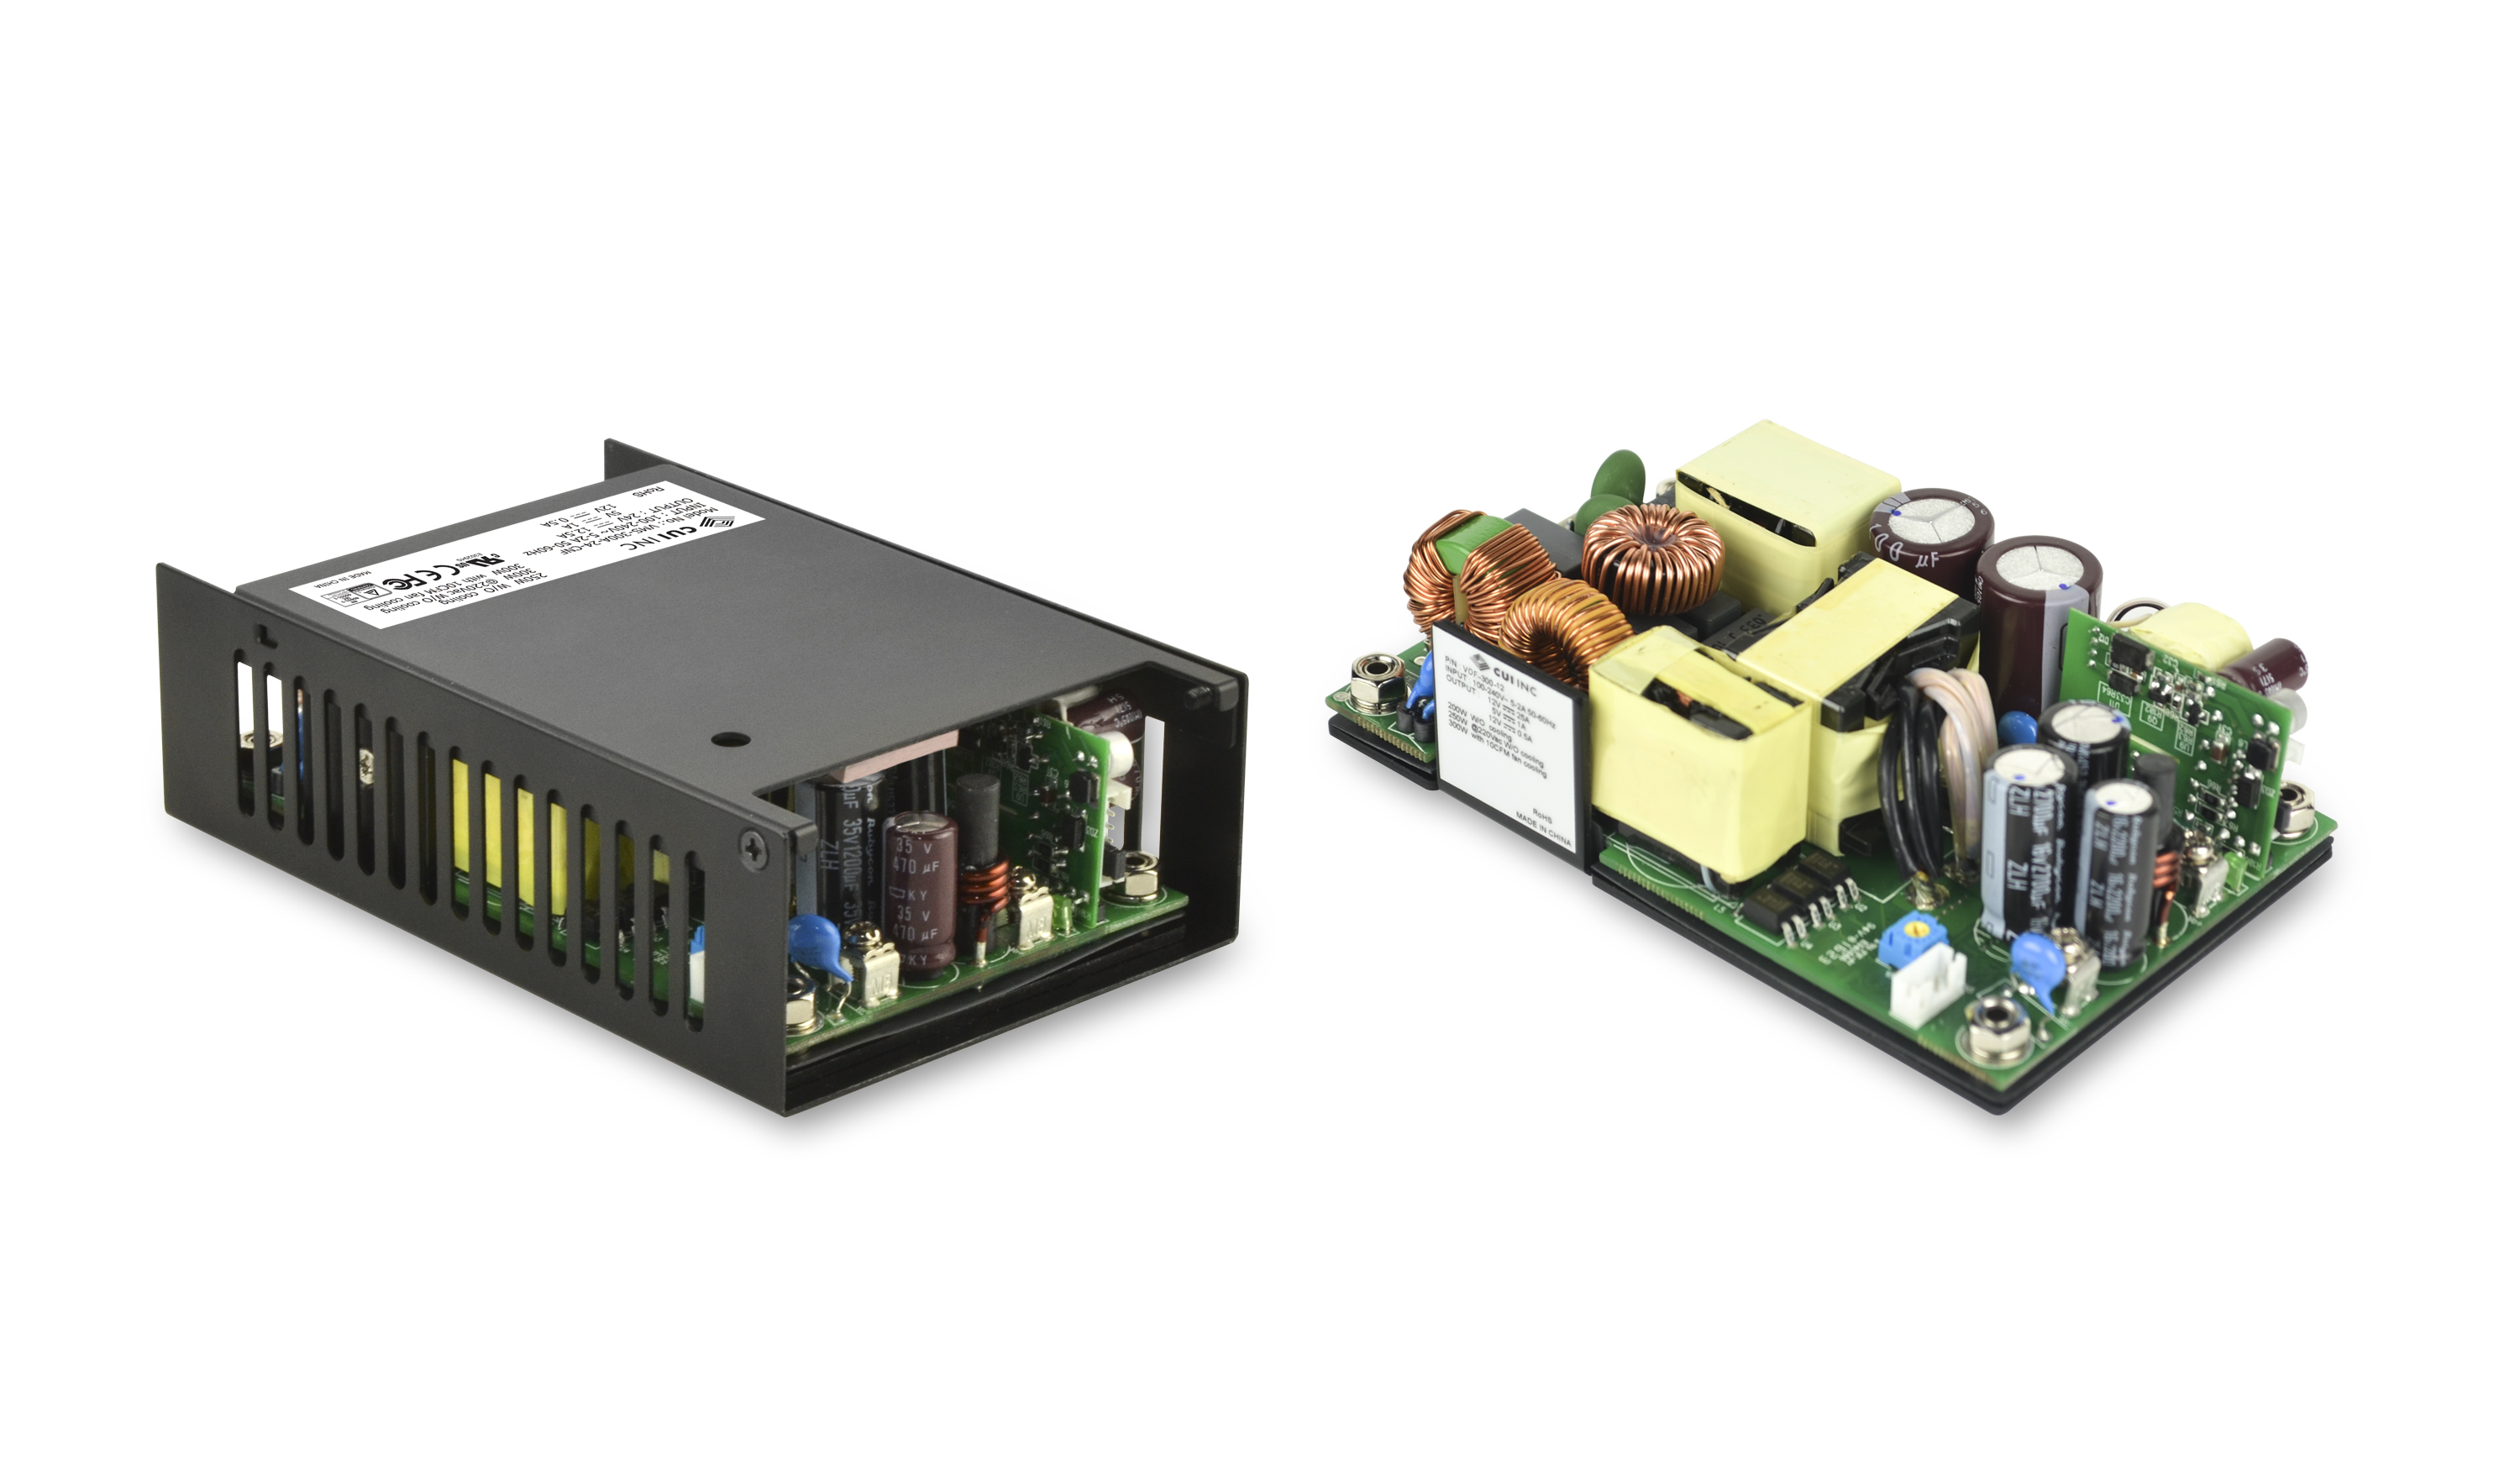 300 W Ac-Dc Power Supply Series Offers High Efficiency in a 3” x 5” Package